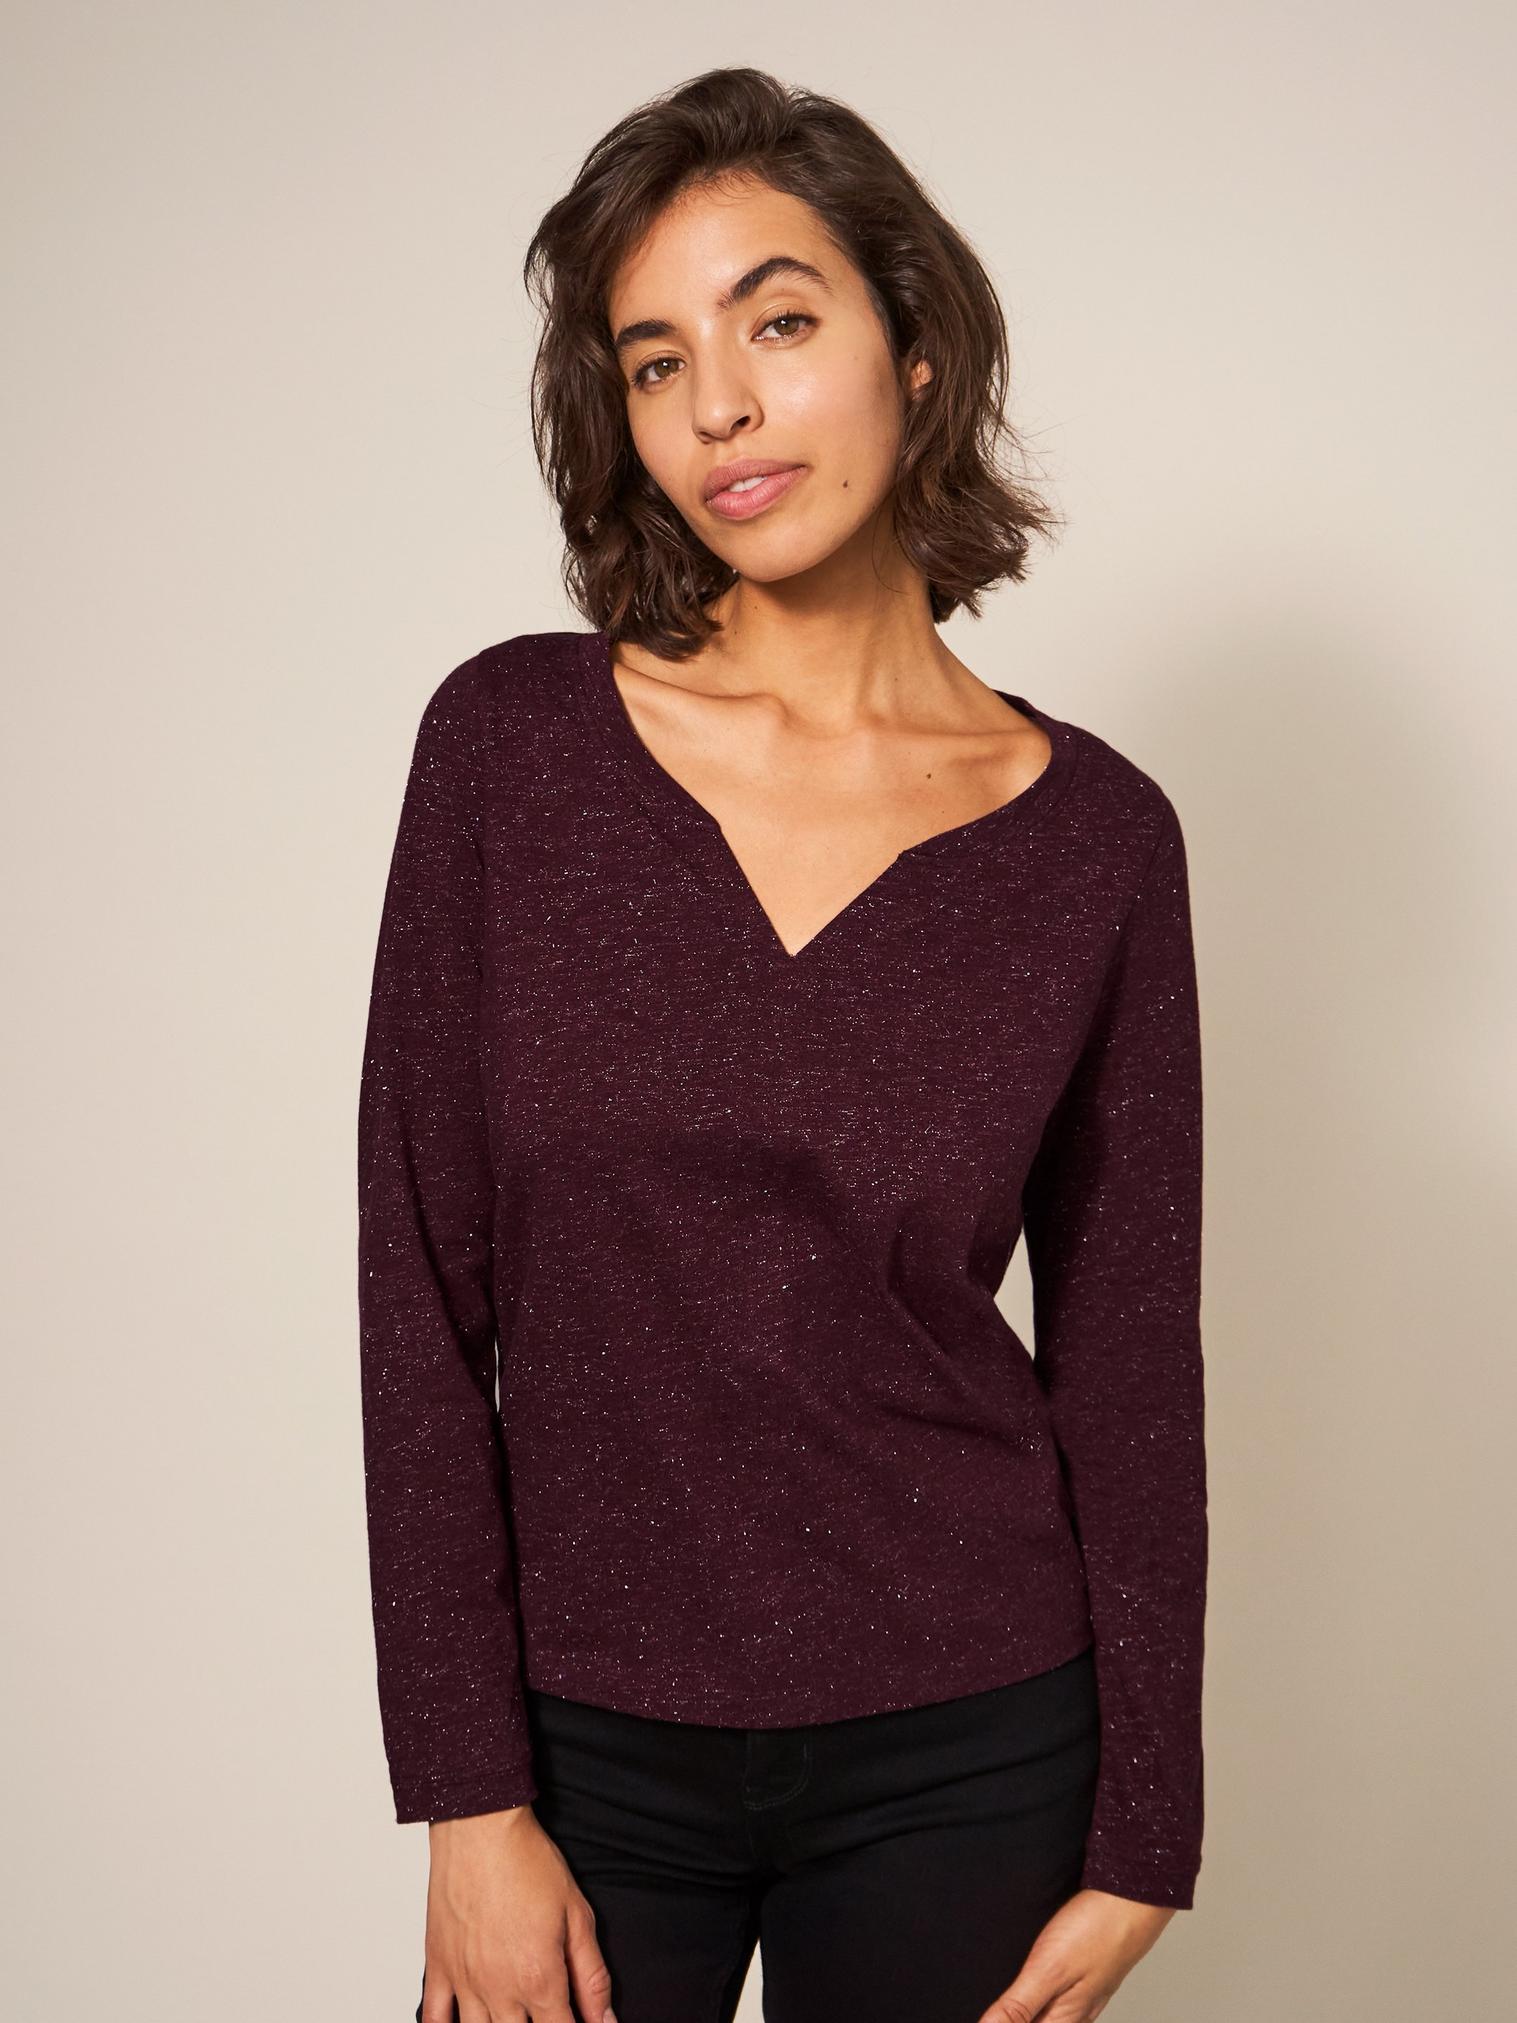 NELLY LS SPARKLE TEE in DK PLUM - LIFESTYLE